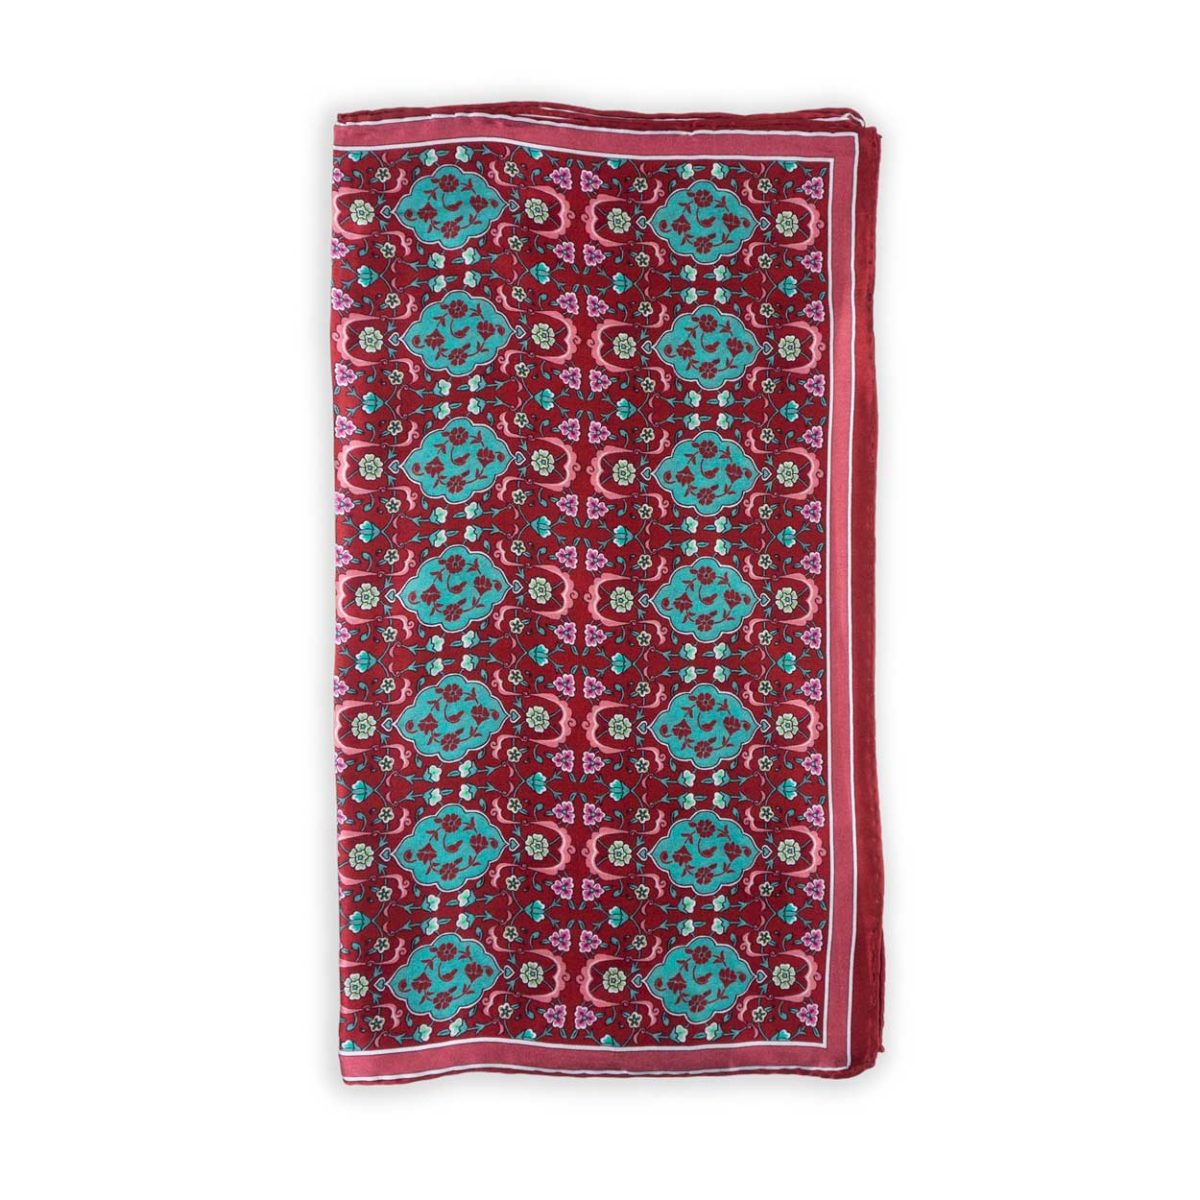 Red silk scarf with floral print inspired by Turkish Art